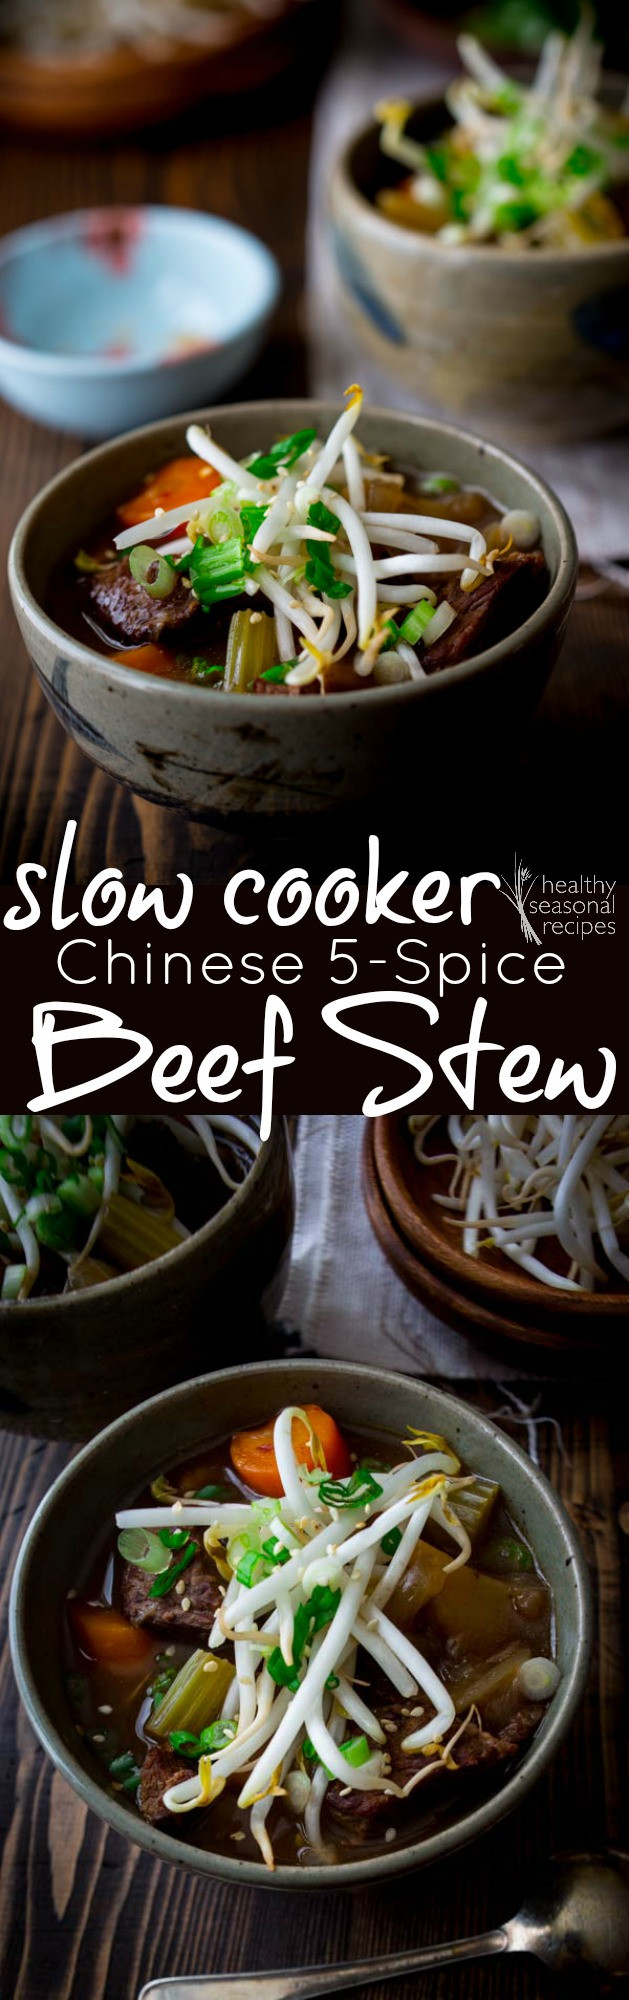 Healthy Slow Cooker Chinese Recipes
 slow cooker chinese 5 spice beef stew Healthy Seasonal